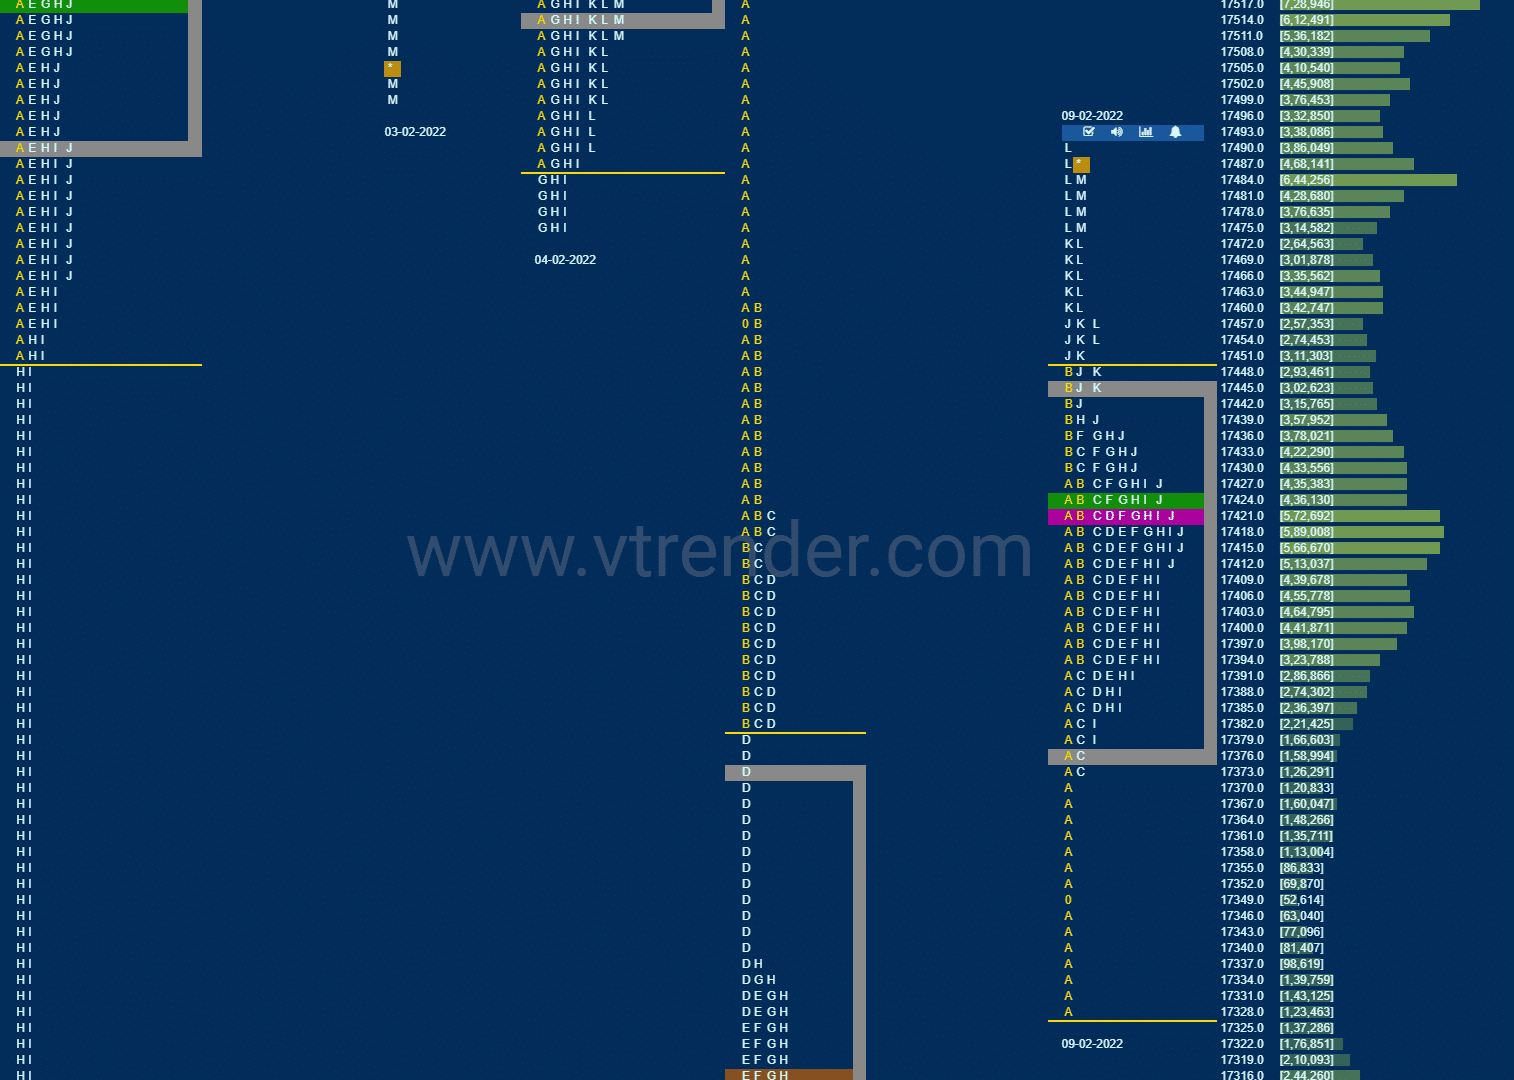 Nf 6 Market Profile Analysis Dated 09Th February 2022 Banknifty Futures, Charts, Day Trading, Intraday Trading, Intraday Trading Strategies, Market Profile, Market Profile Trading Strategies, Nifty Futures, Order Flow Analysis, Support And Resistance, Technical Analysis, Trading Strategies, Volume Profile Trading